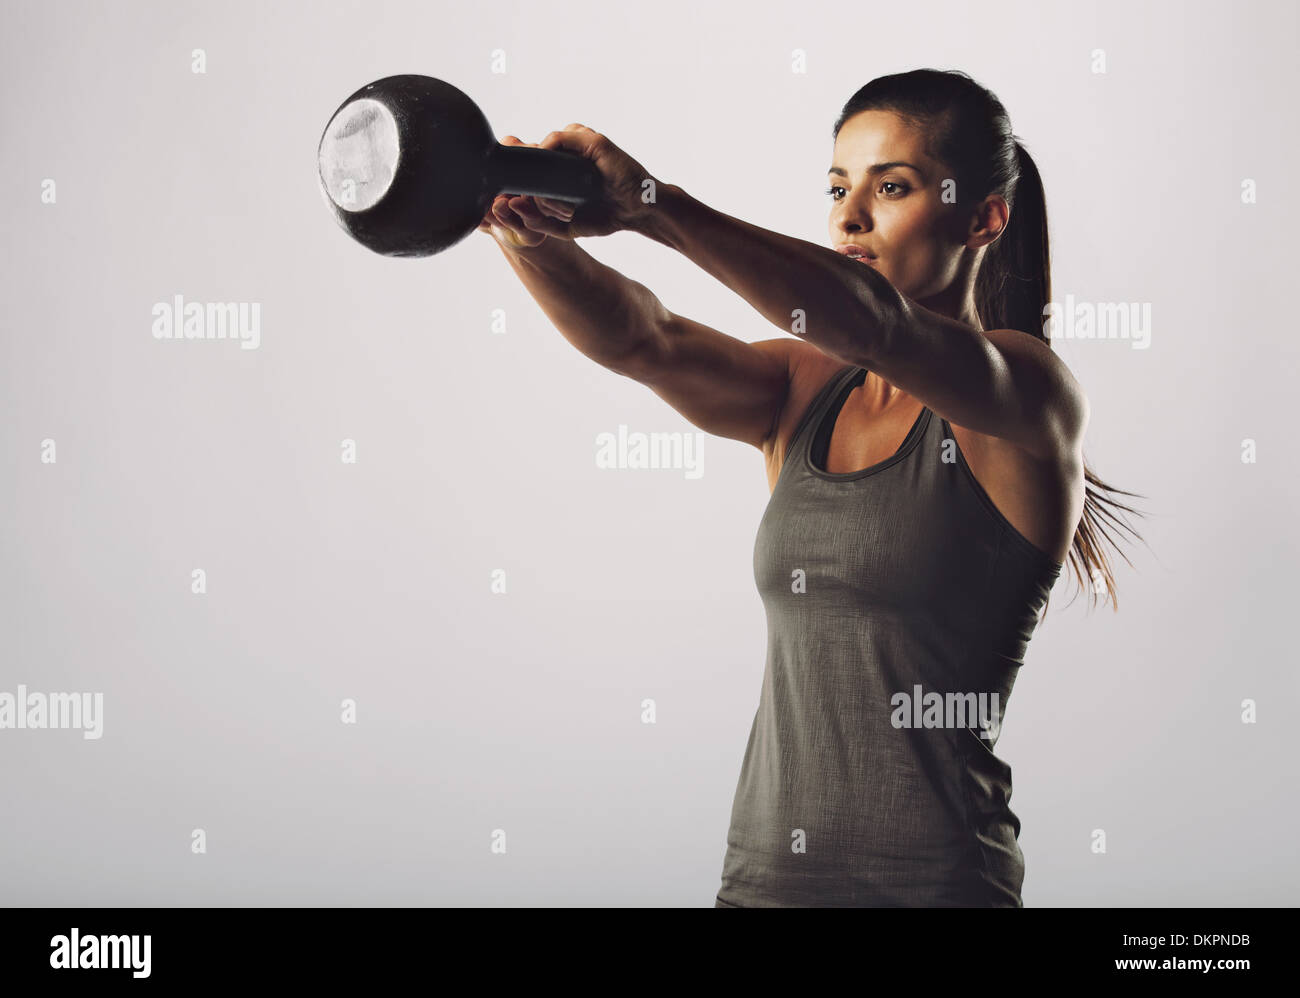 Image of young attractive female doing kettle bell exercise on grey background. Fitness woman working out. Crossfit exercise. Stock Photo